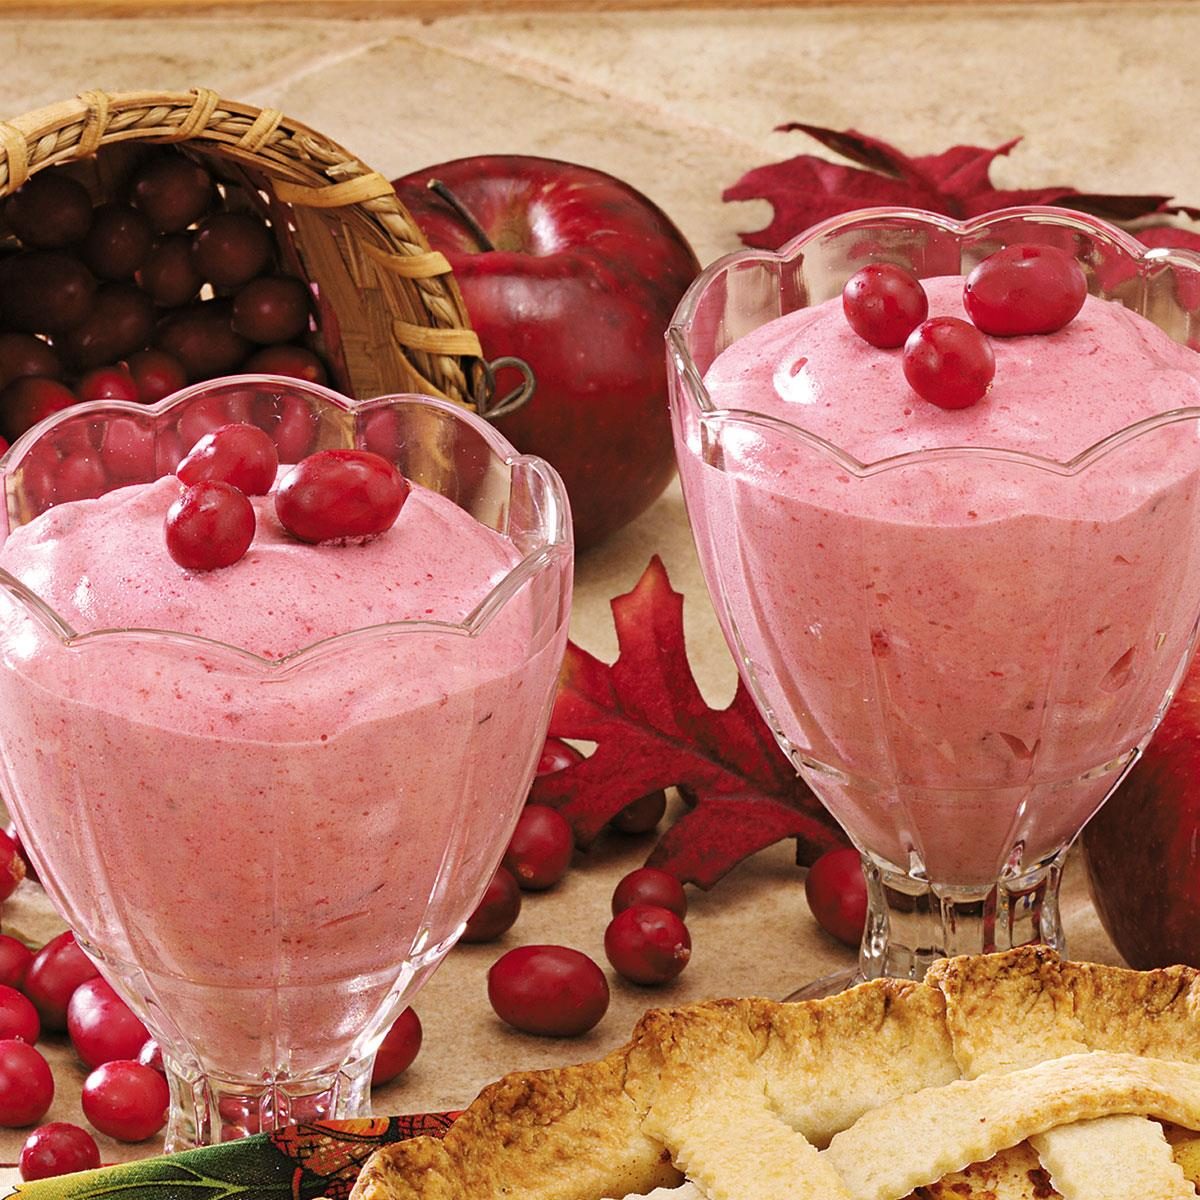 Cranberry Parfaits Recipe: How to Make It